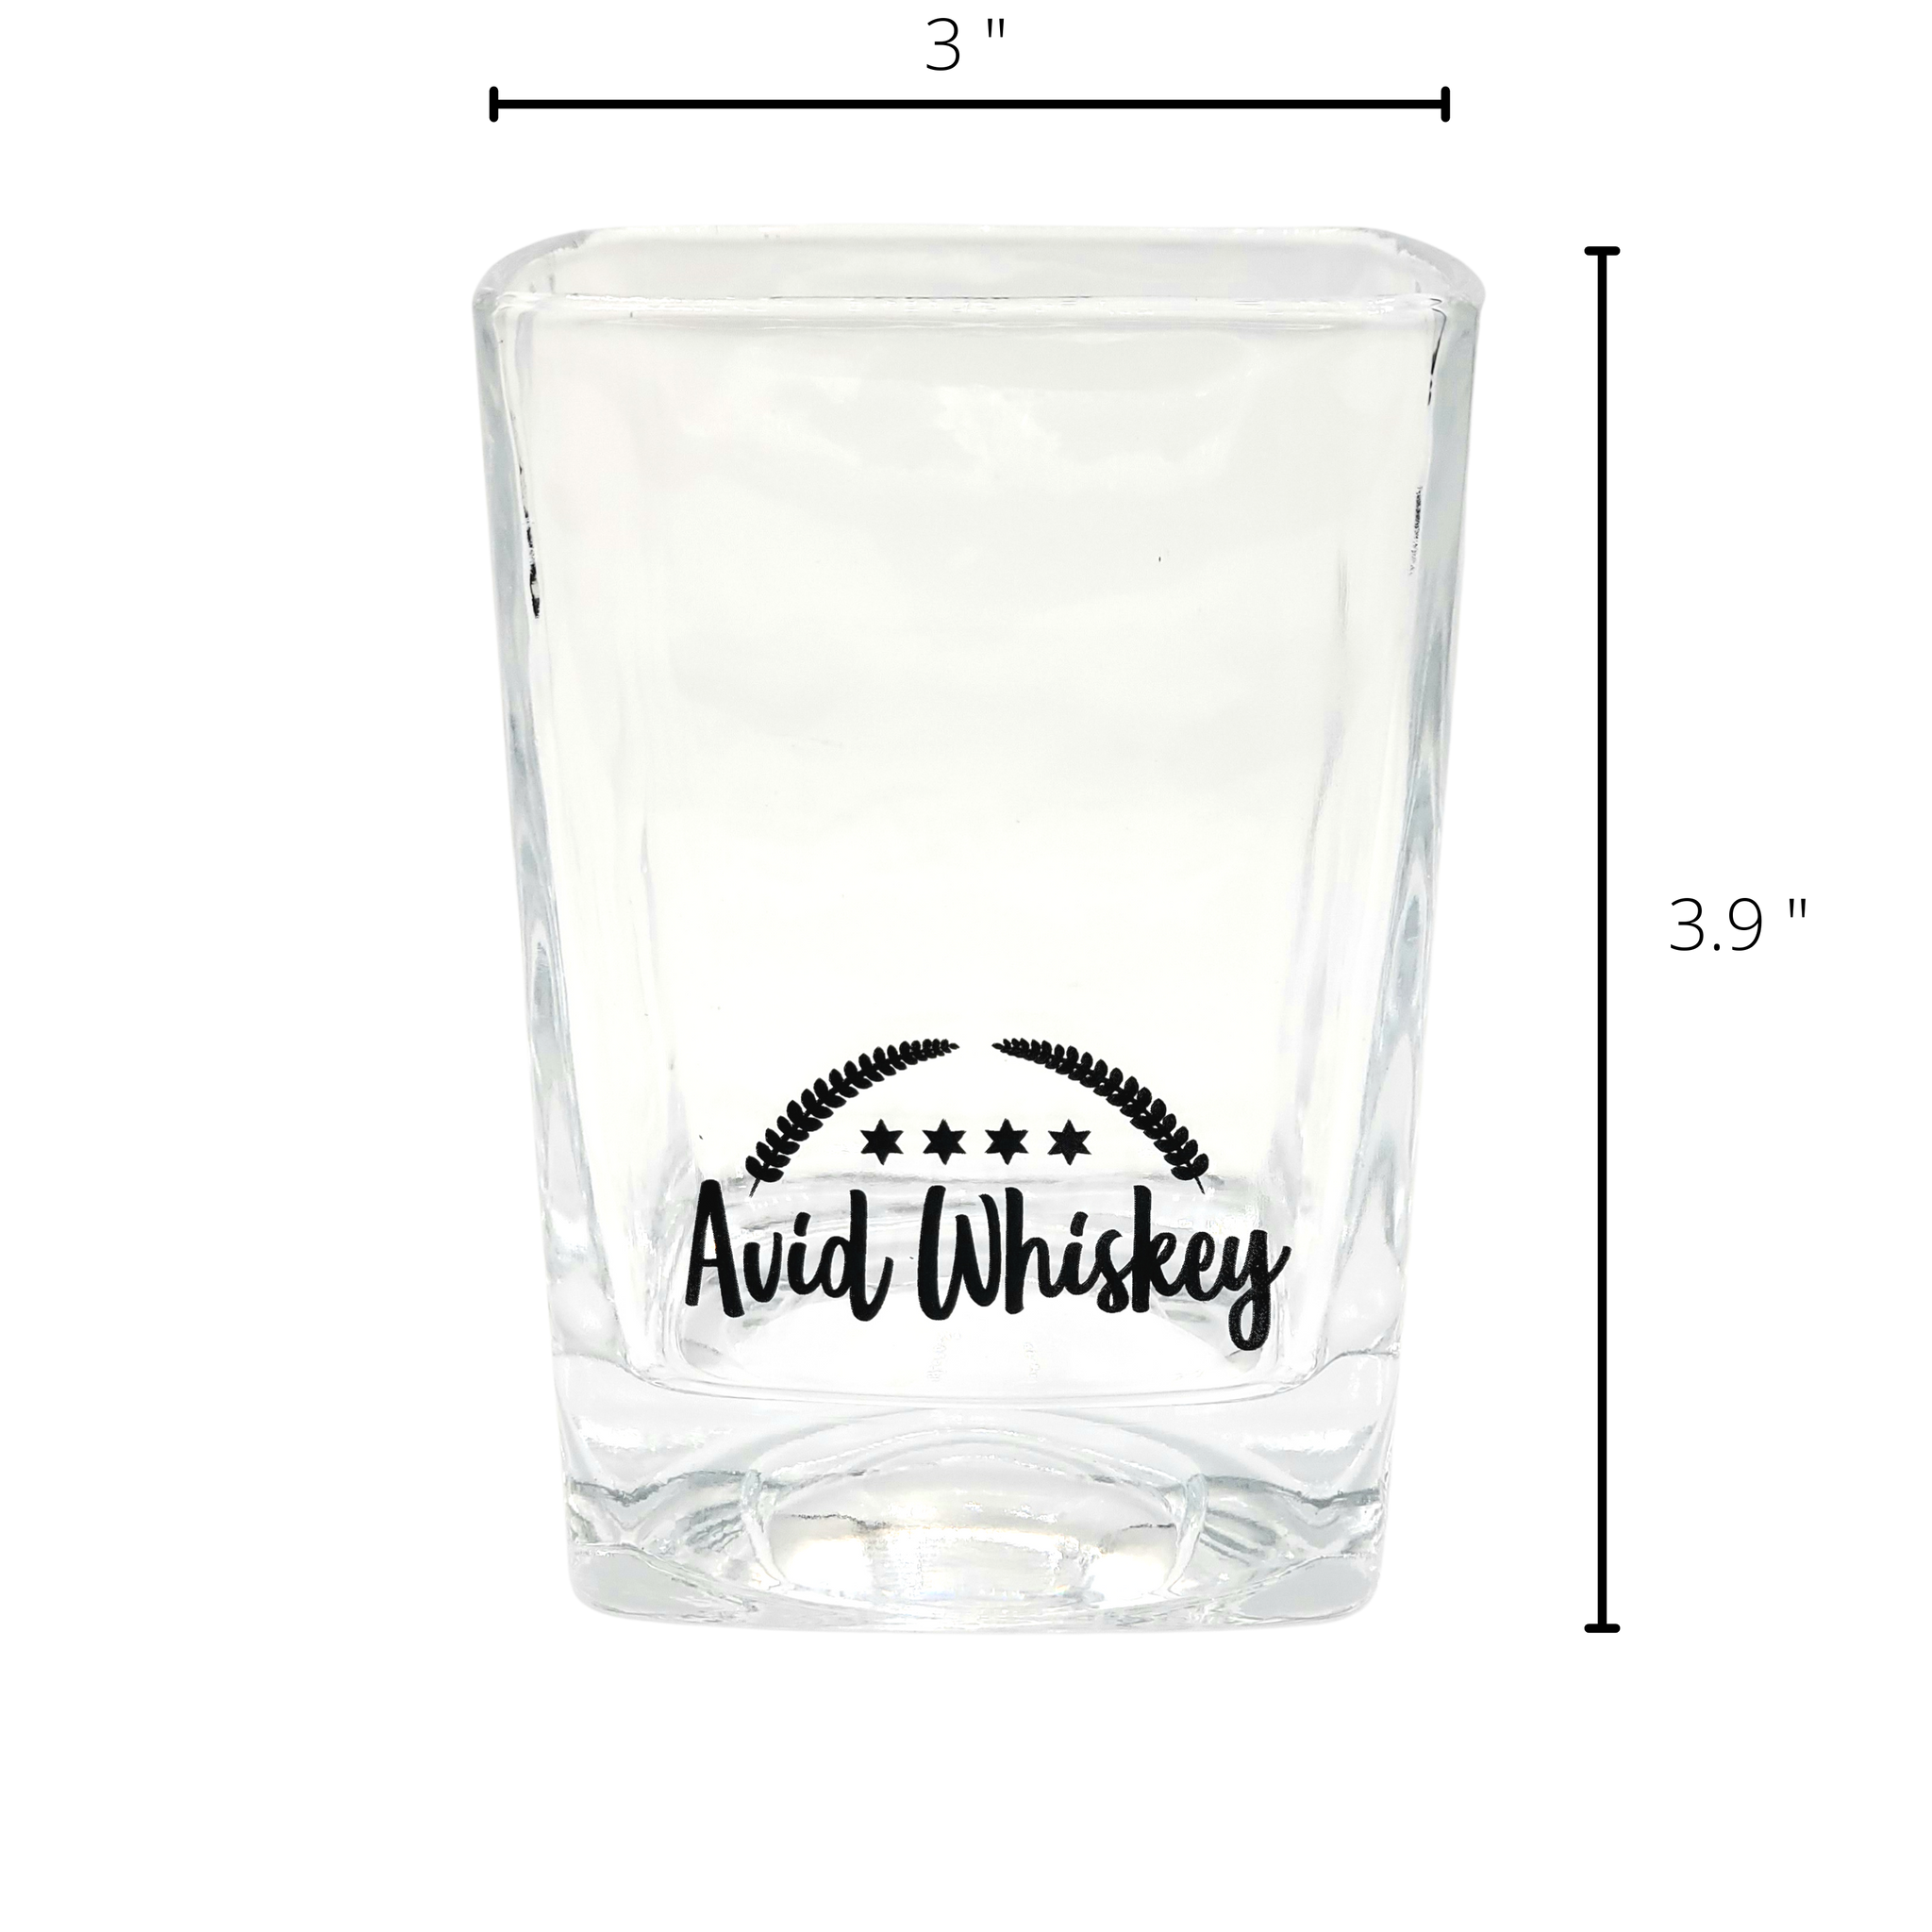 Whiskey Wedge Ice Mould – Kitchen Groups